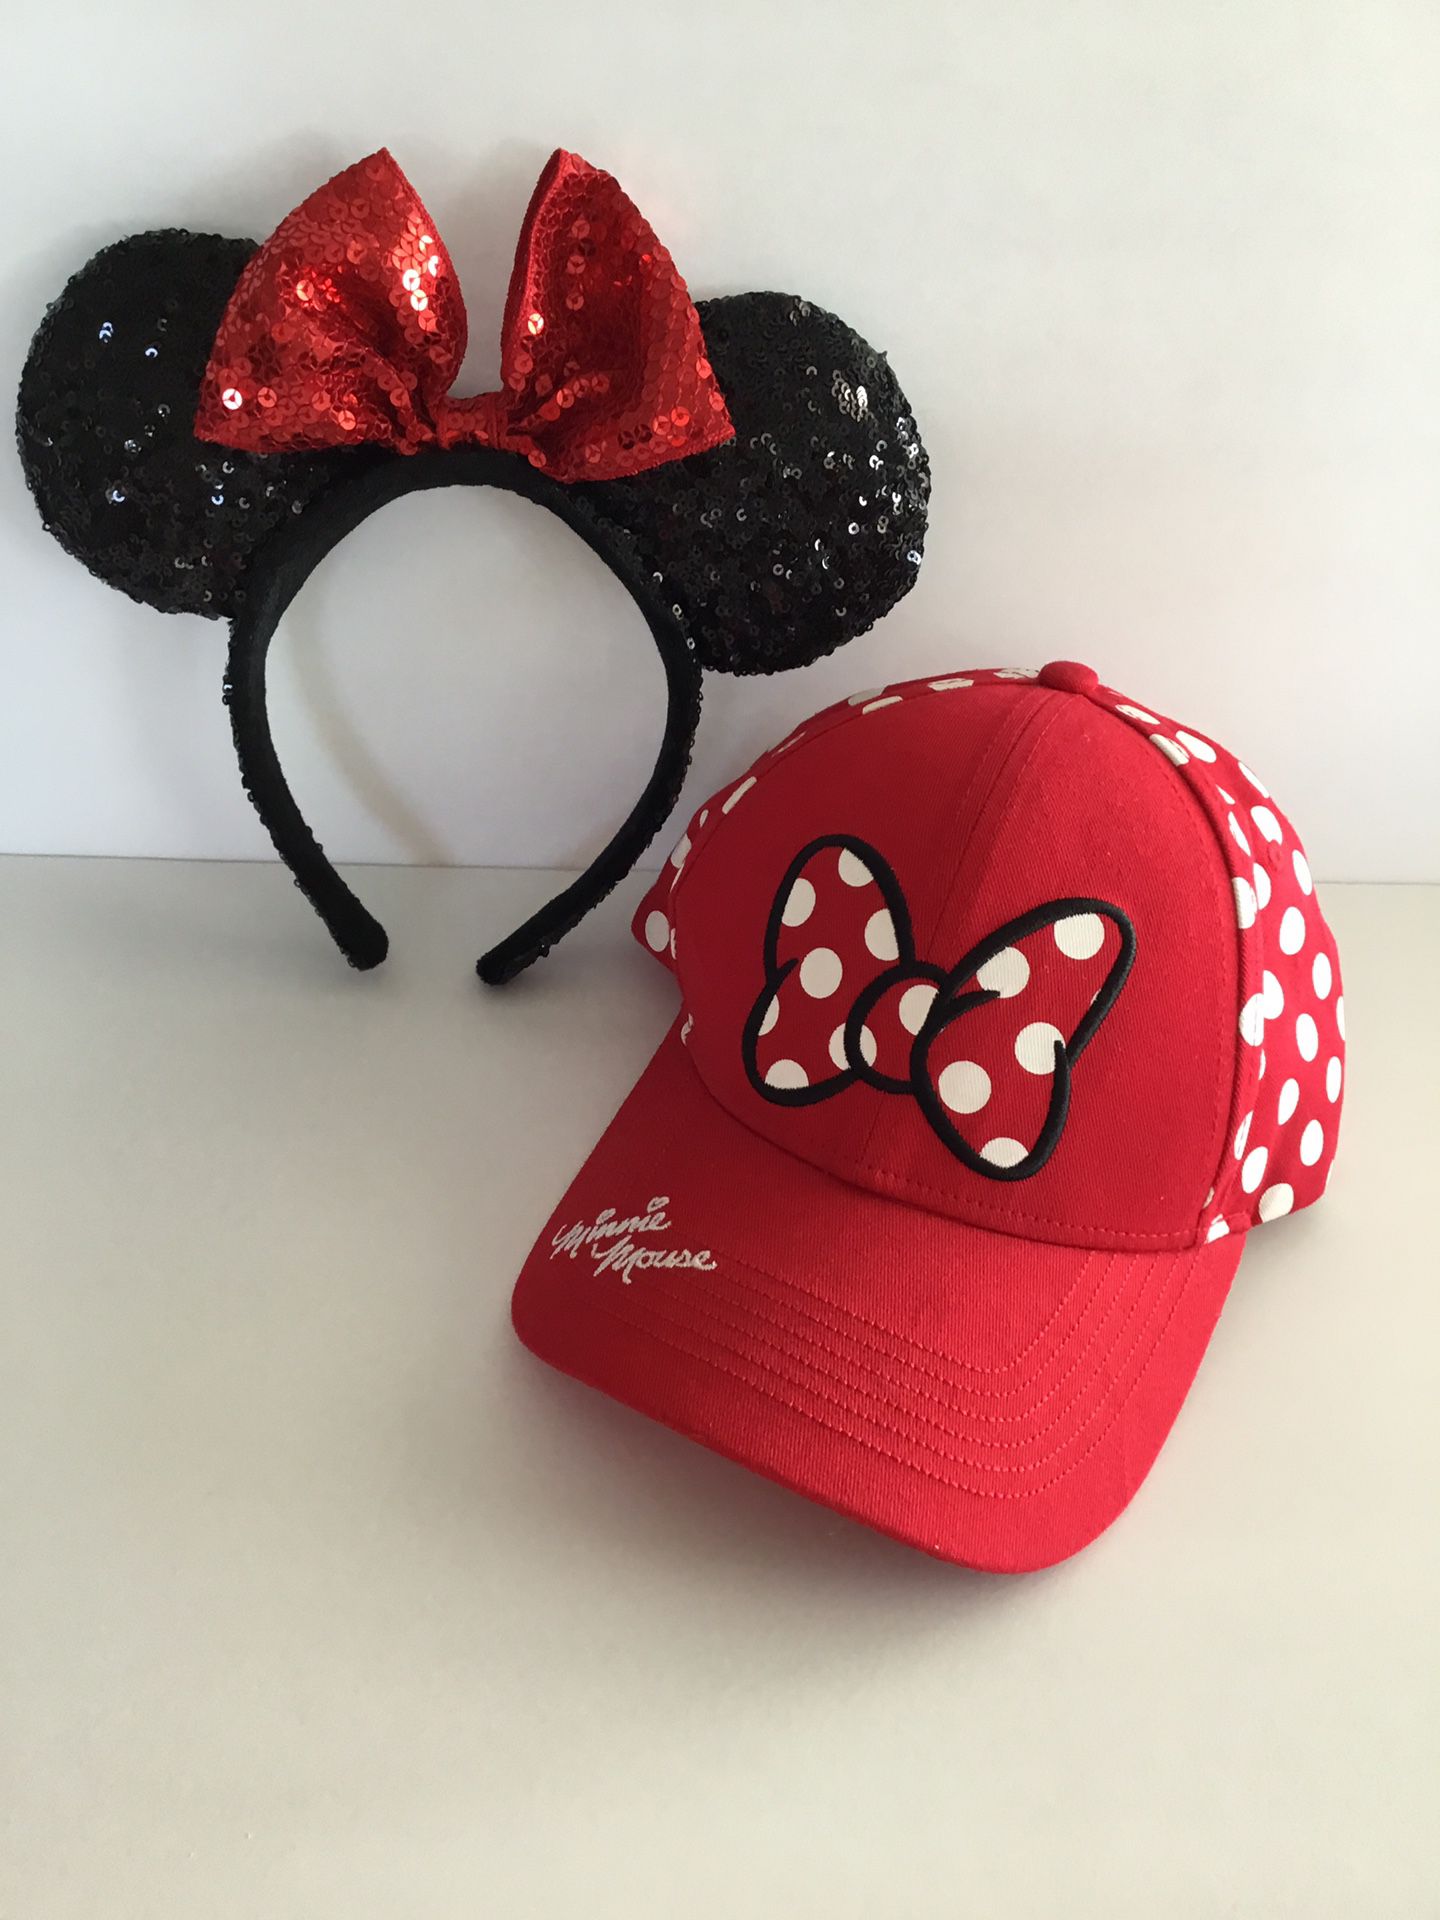 Disney Minnie Mouse Glitter Ears and Minnie Autographed Baseball Cap